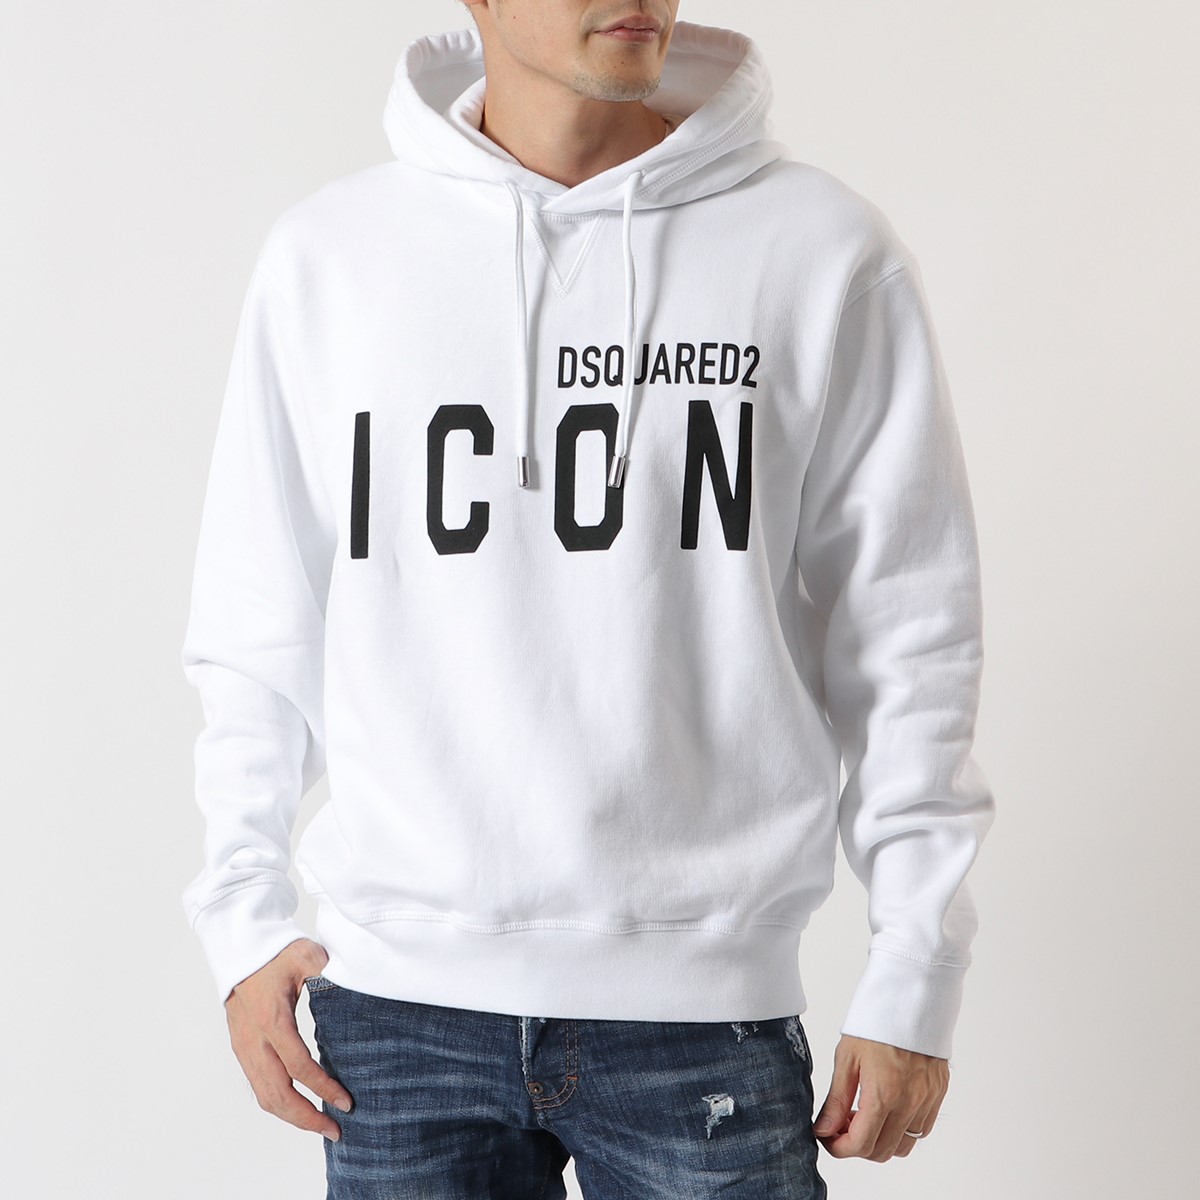 DSQUARED2 ディースクエアード S79GU0003 S25516 Icon Hooded S...